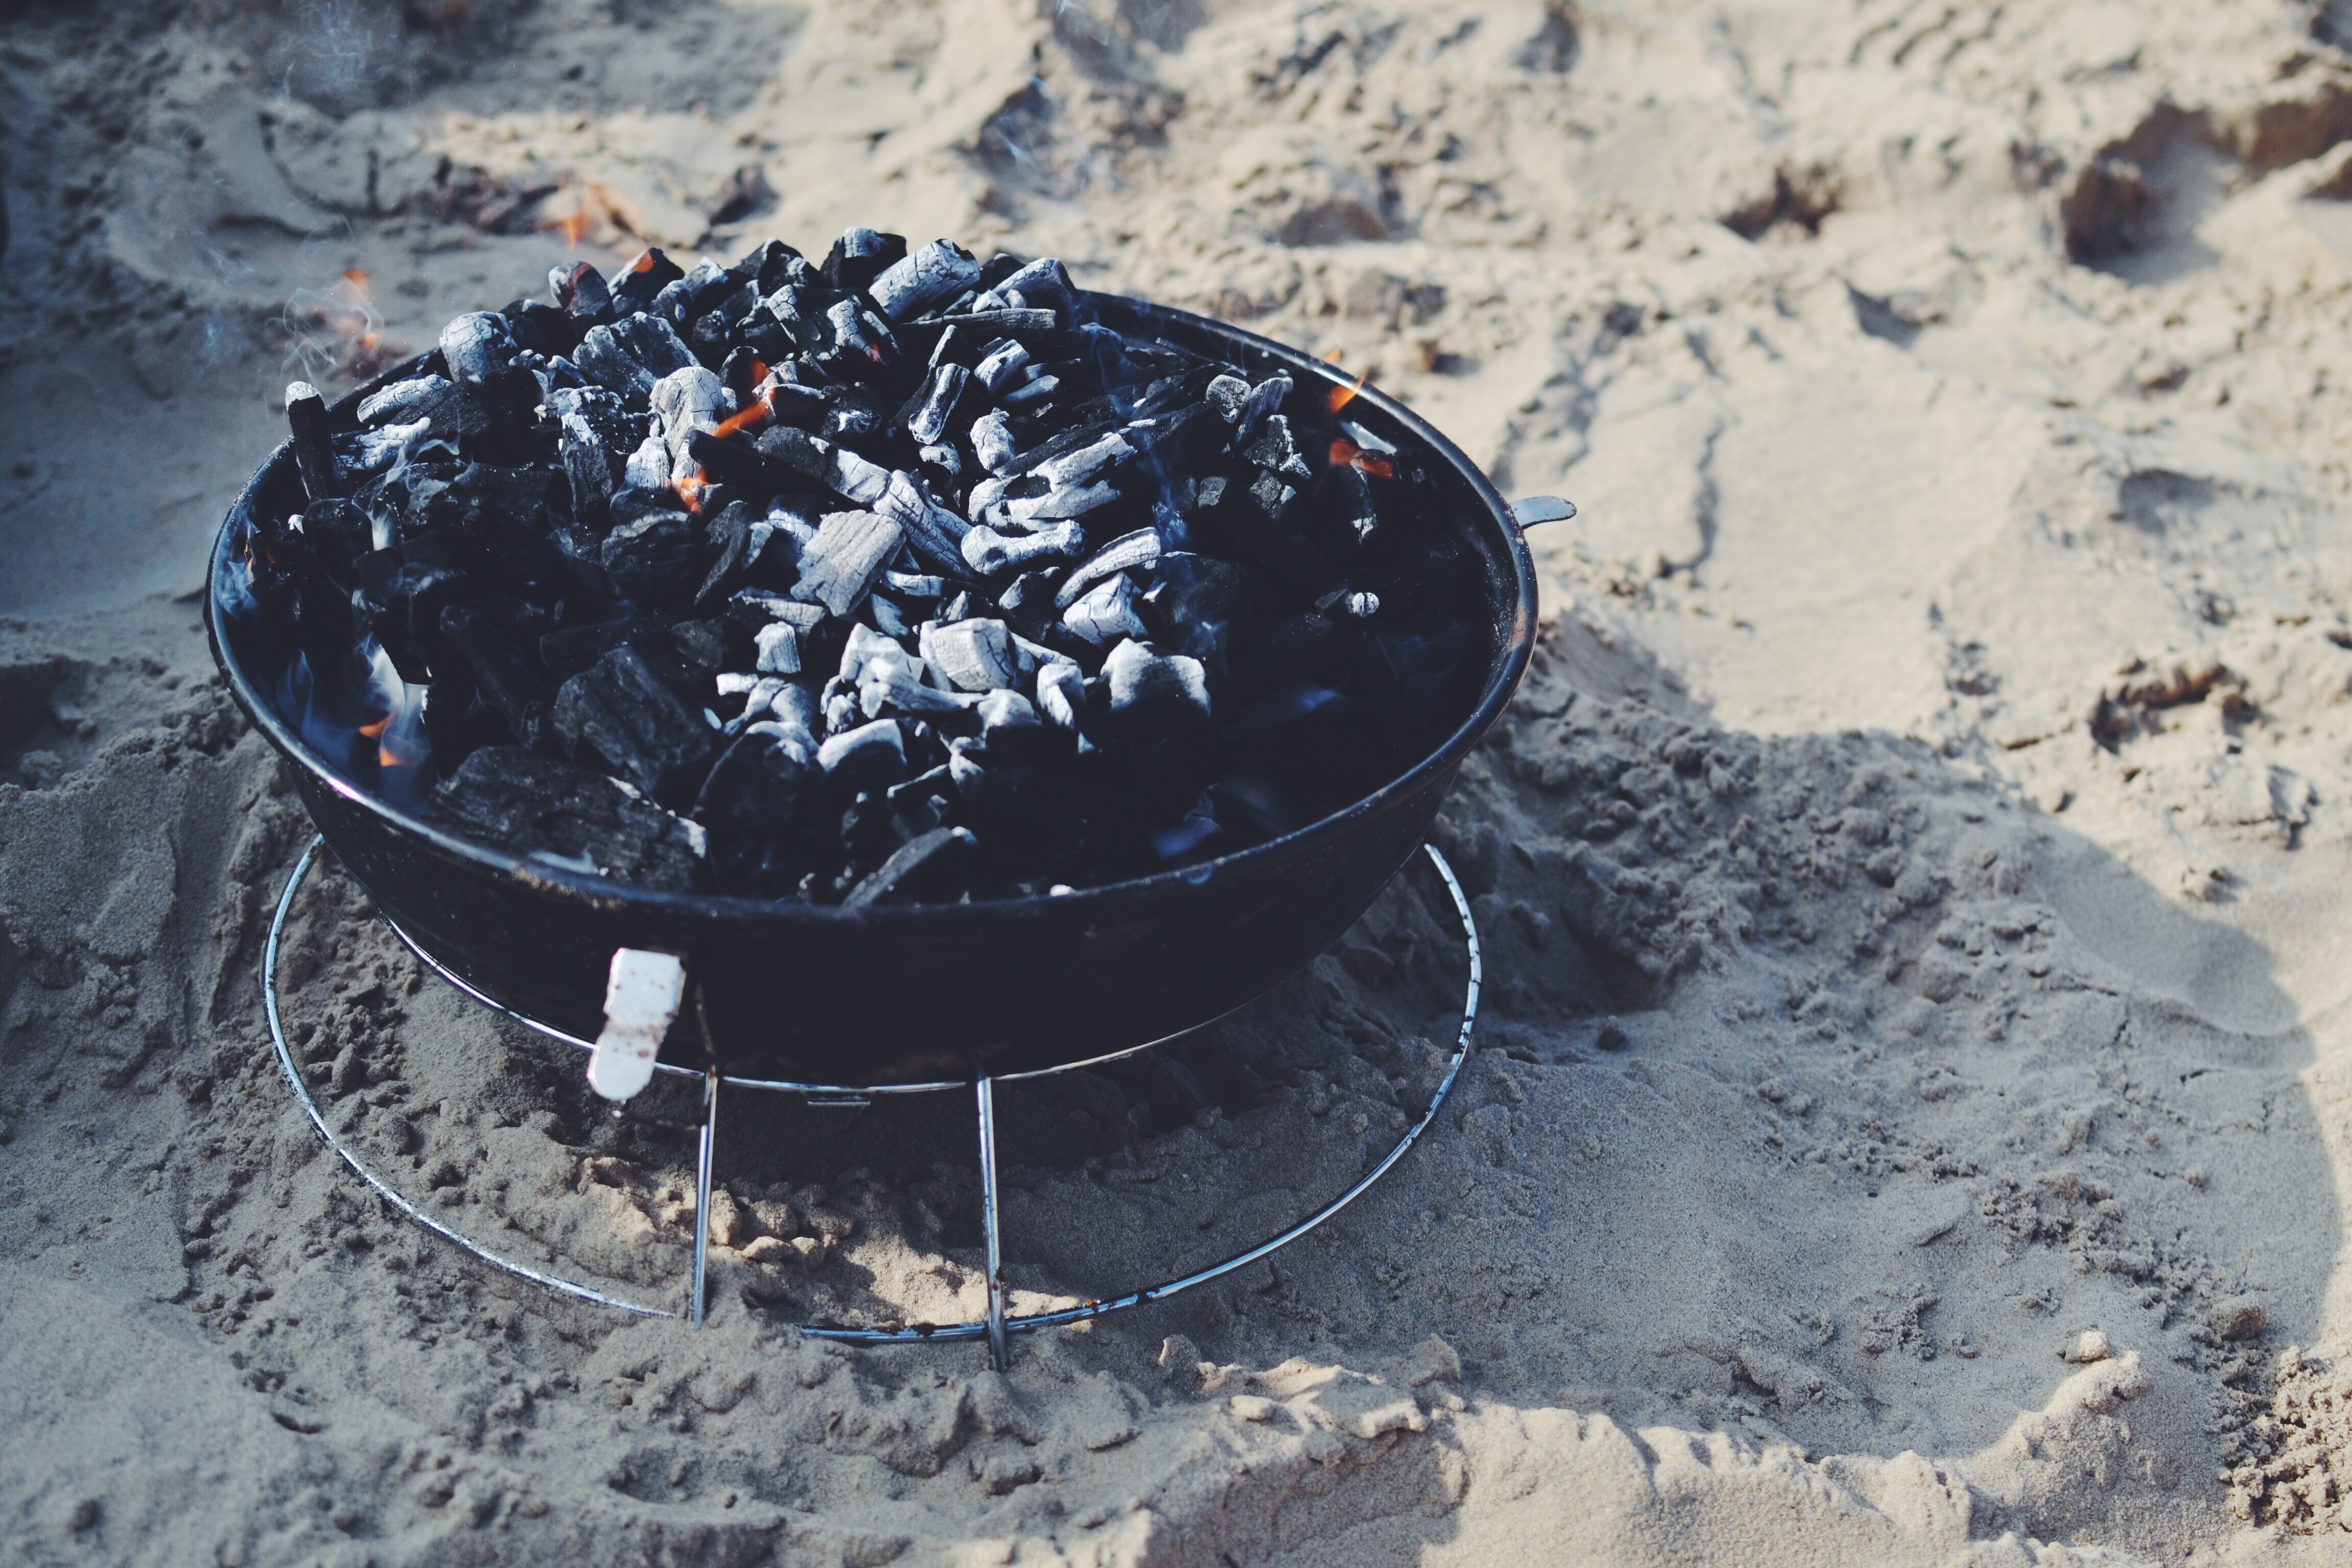 black charcoal grill with charcoal on sand